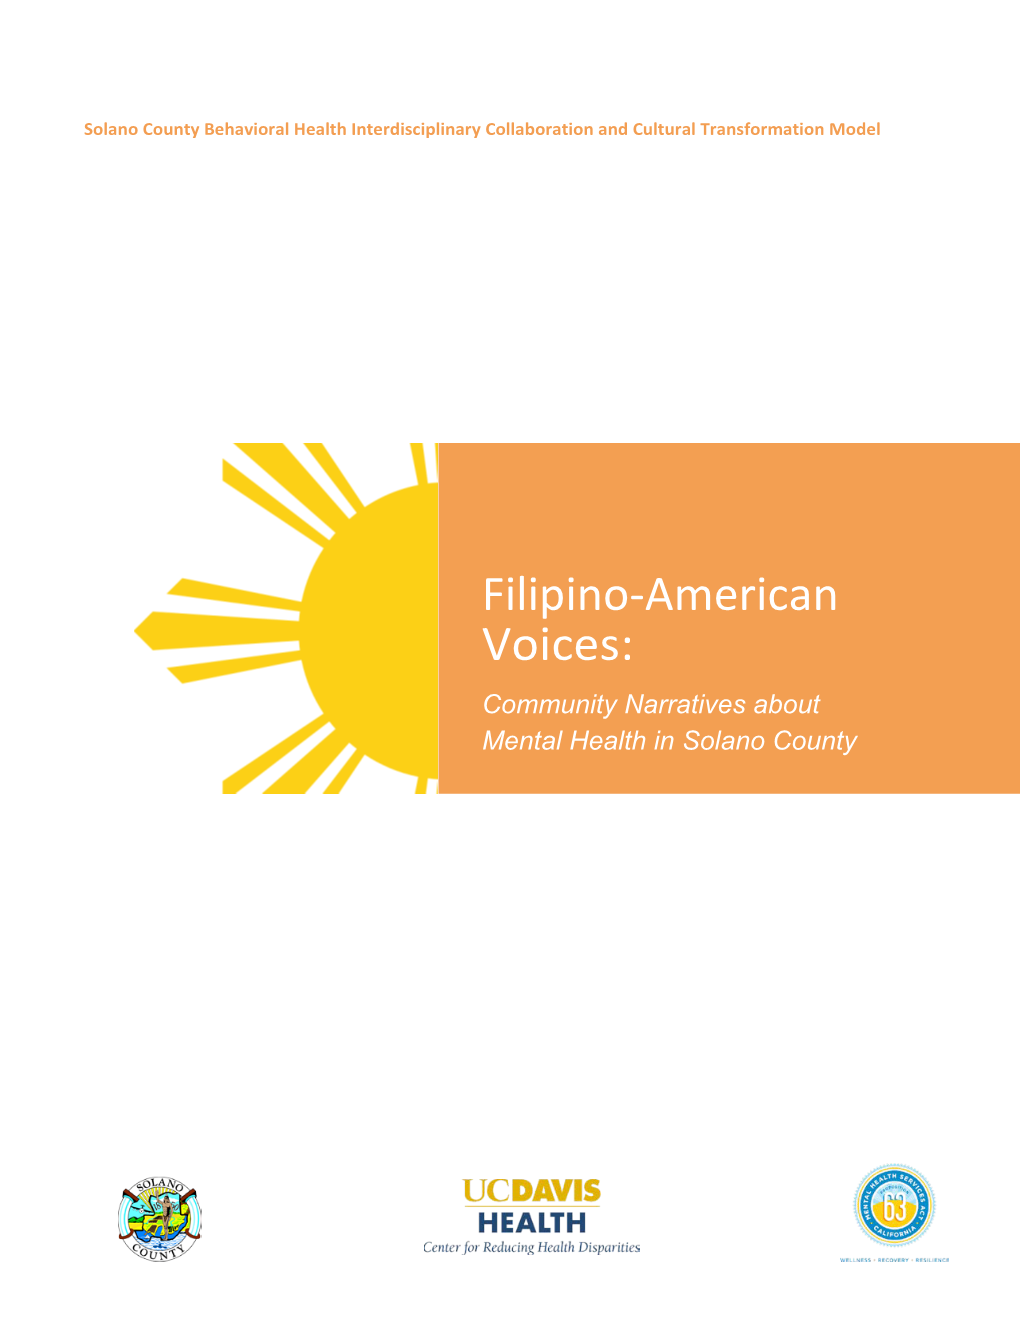 Filipino-American Voices: Community Narratives About Mental Health in Solano County